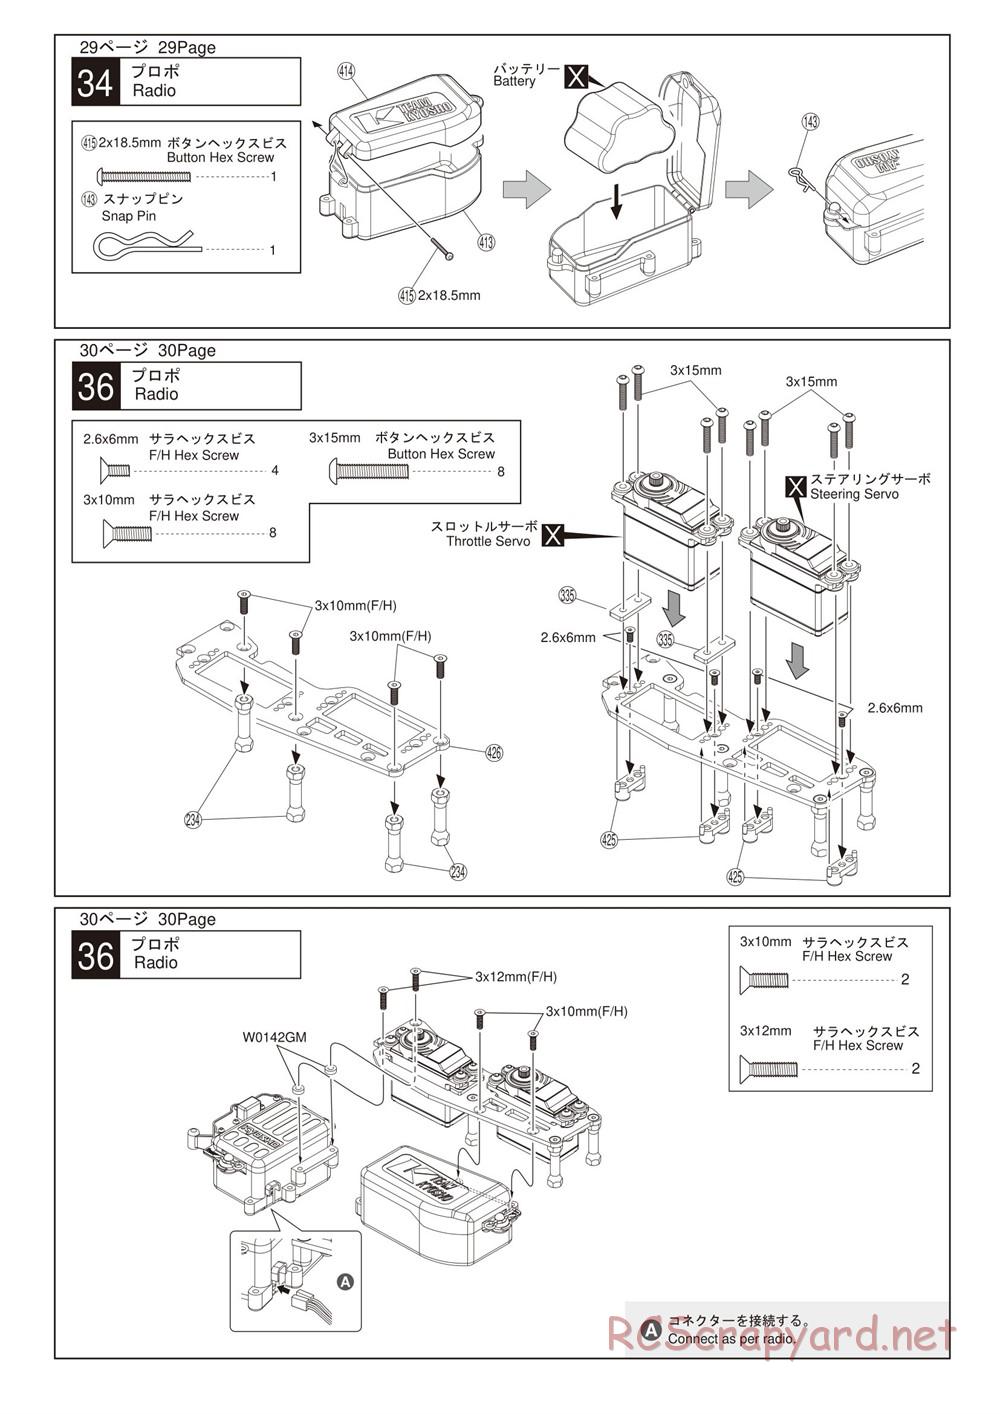 Kyosho - Inferno ST-RR Evo.2 - Manual - Page 3